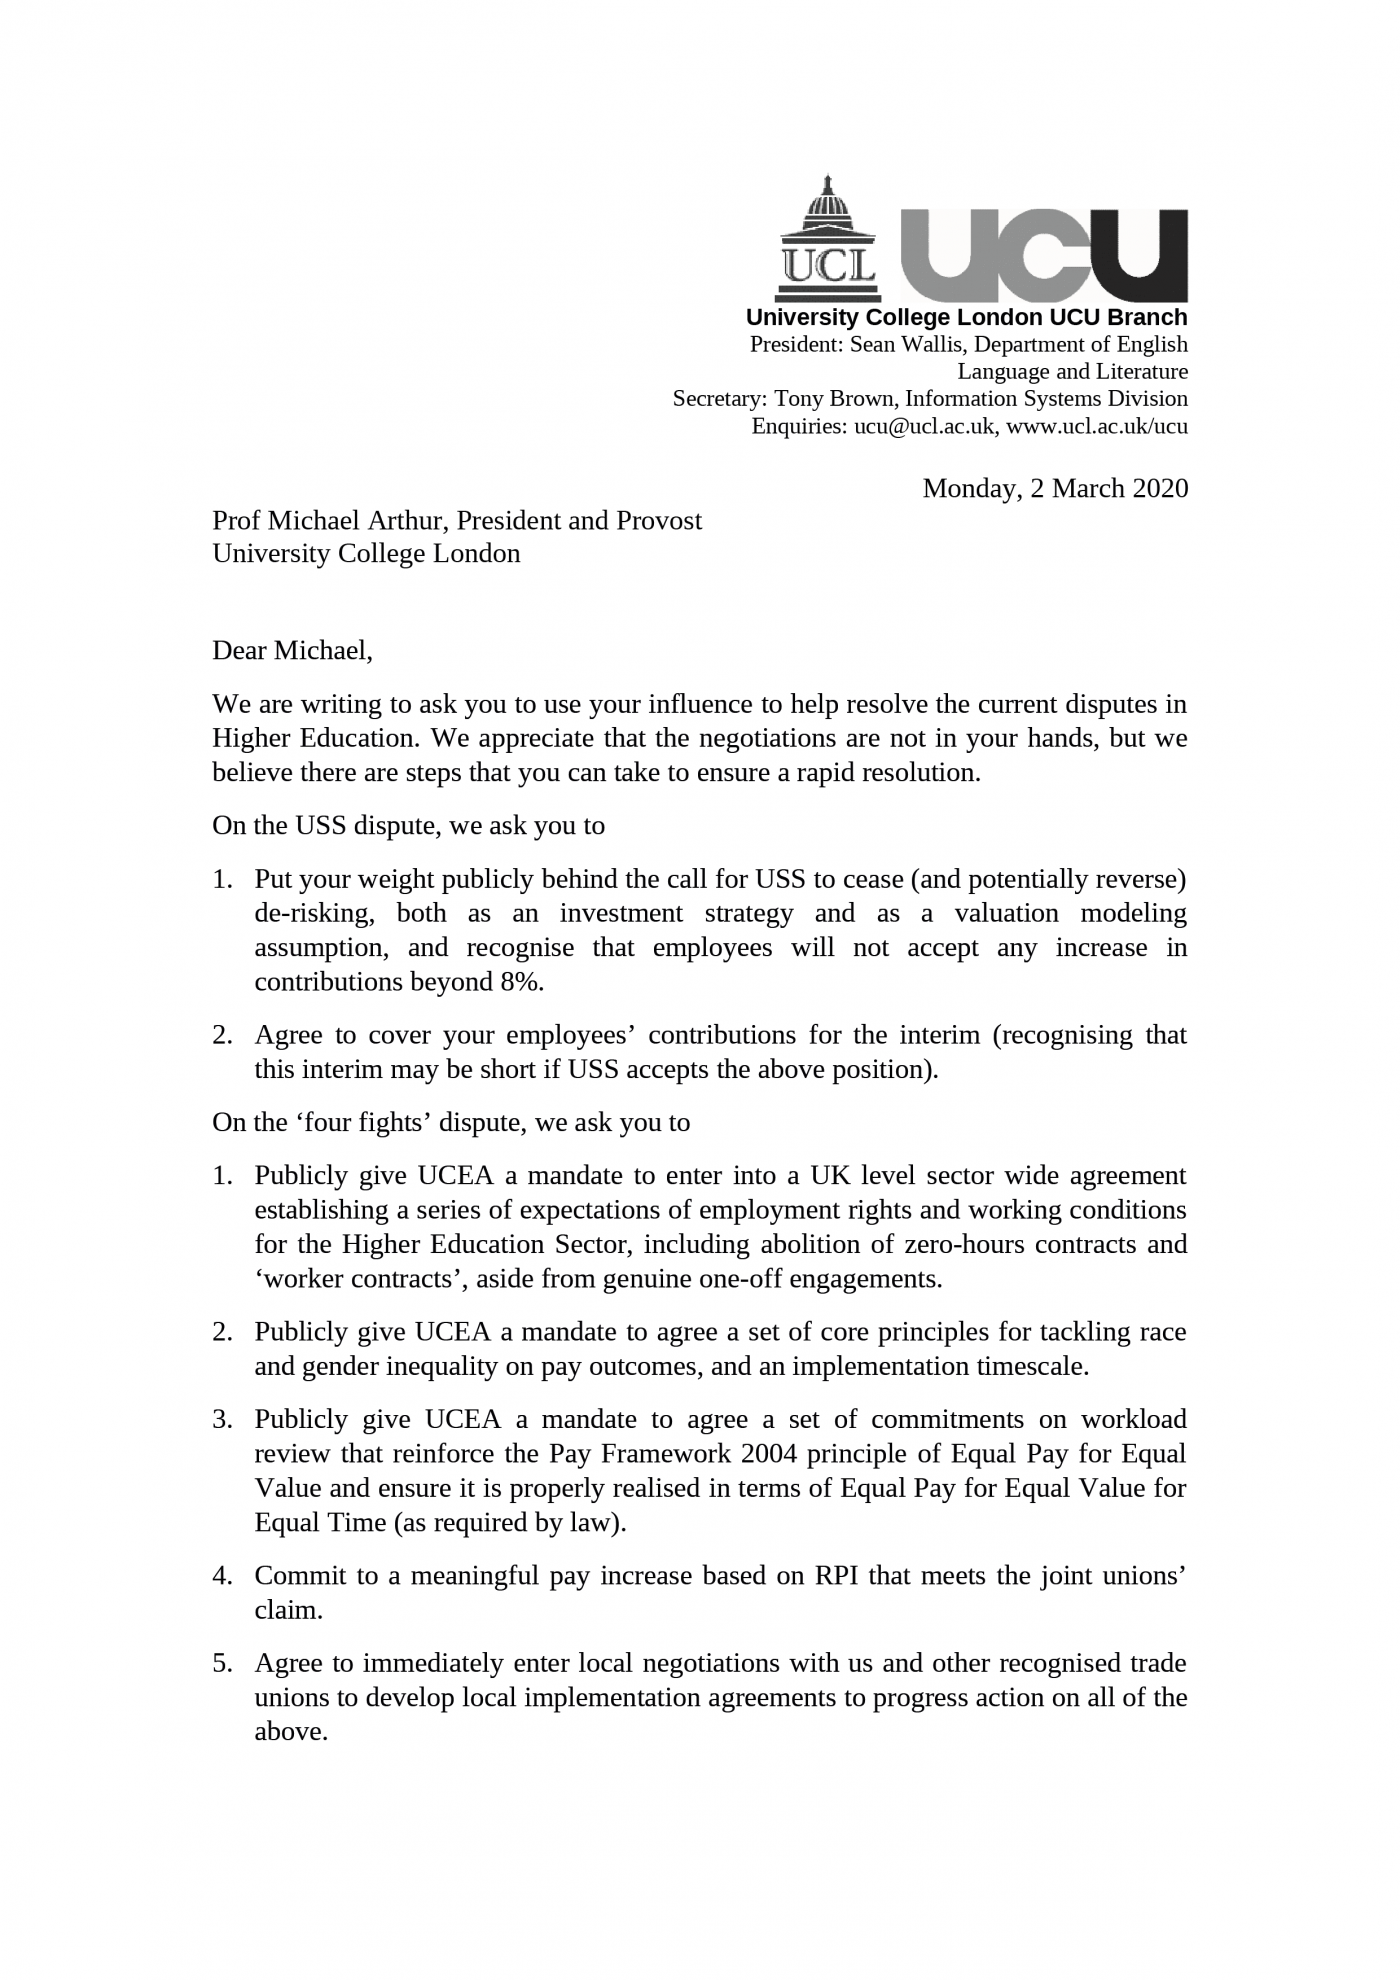 Union letter to Provost - page 1